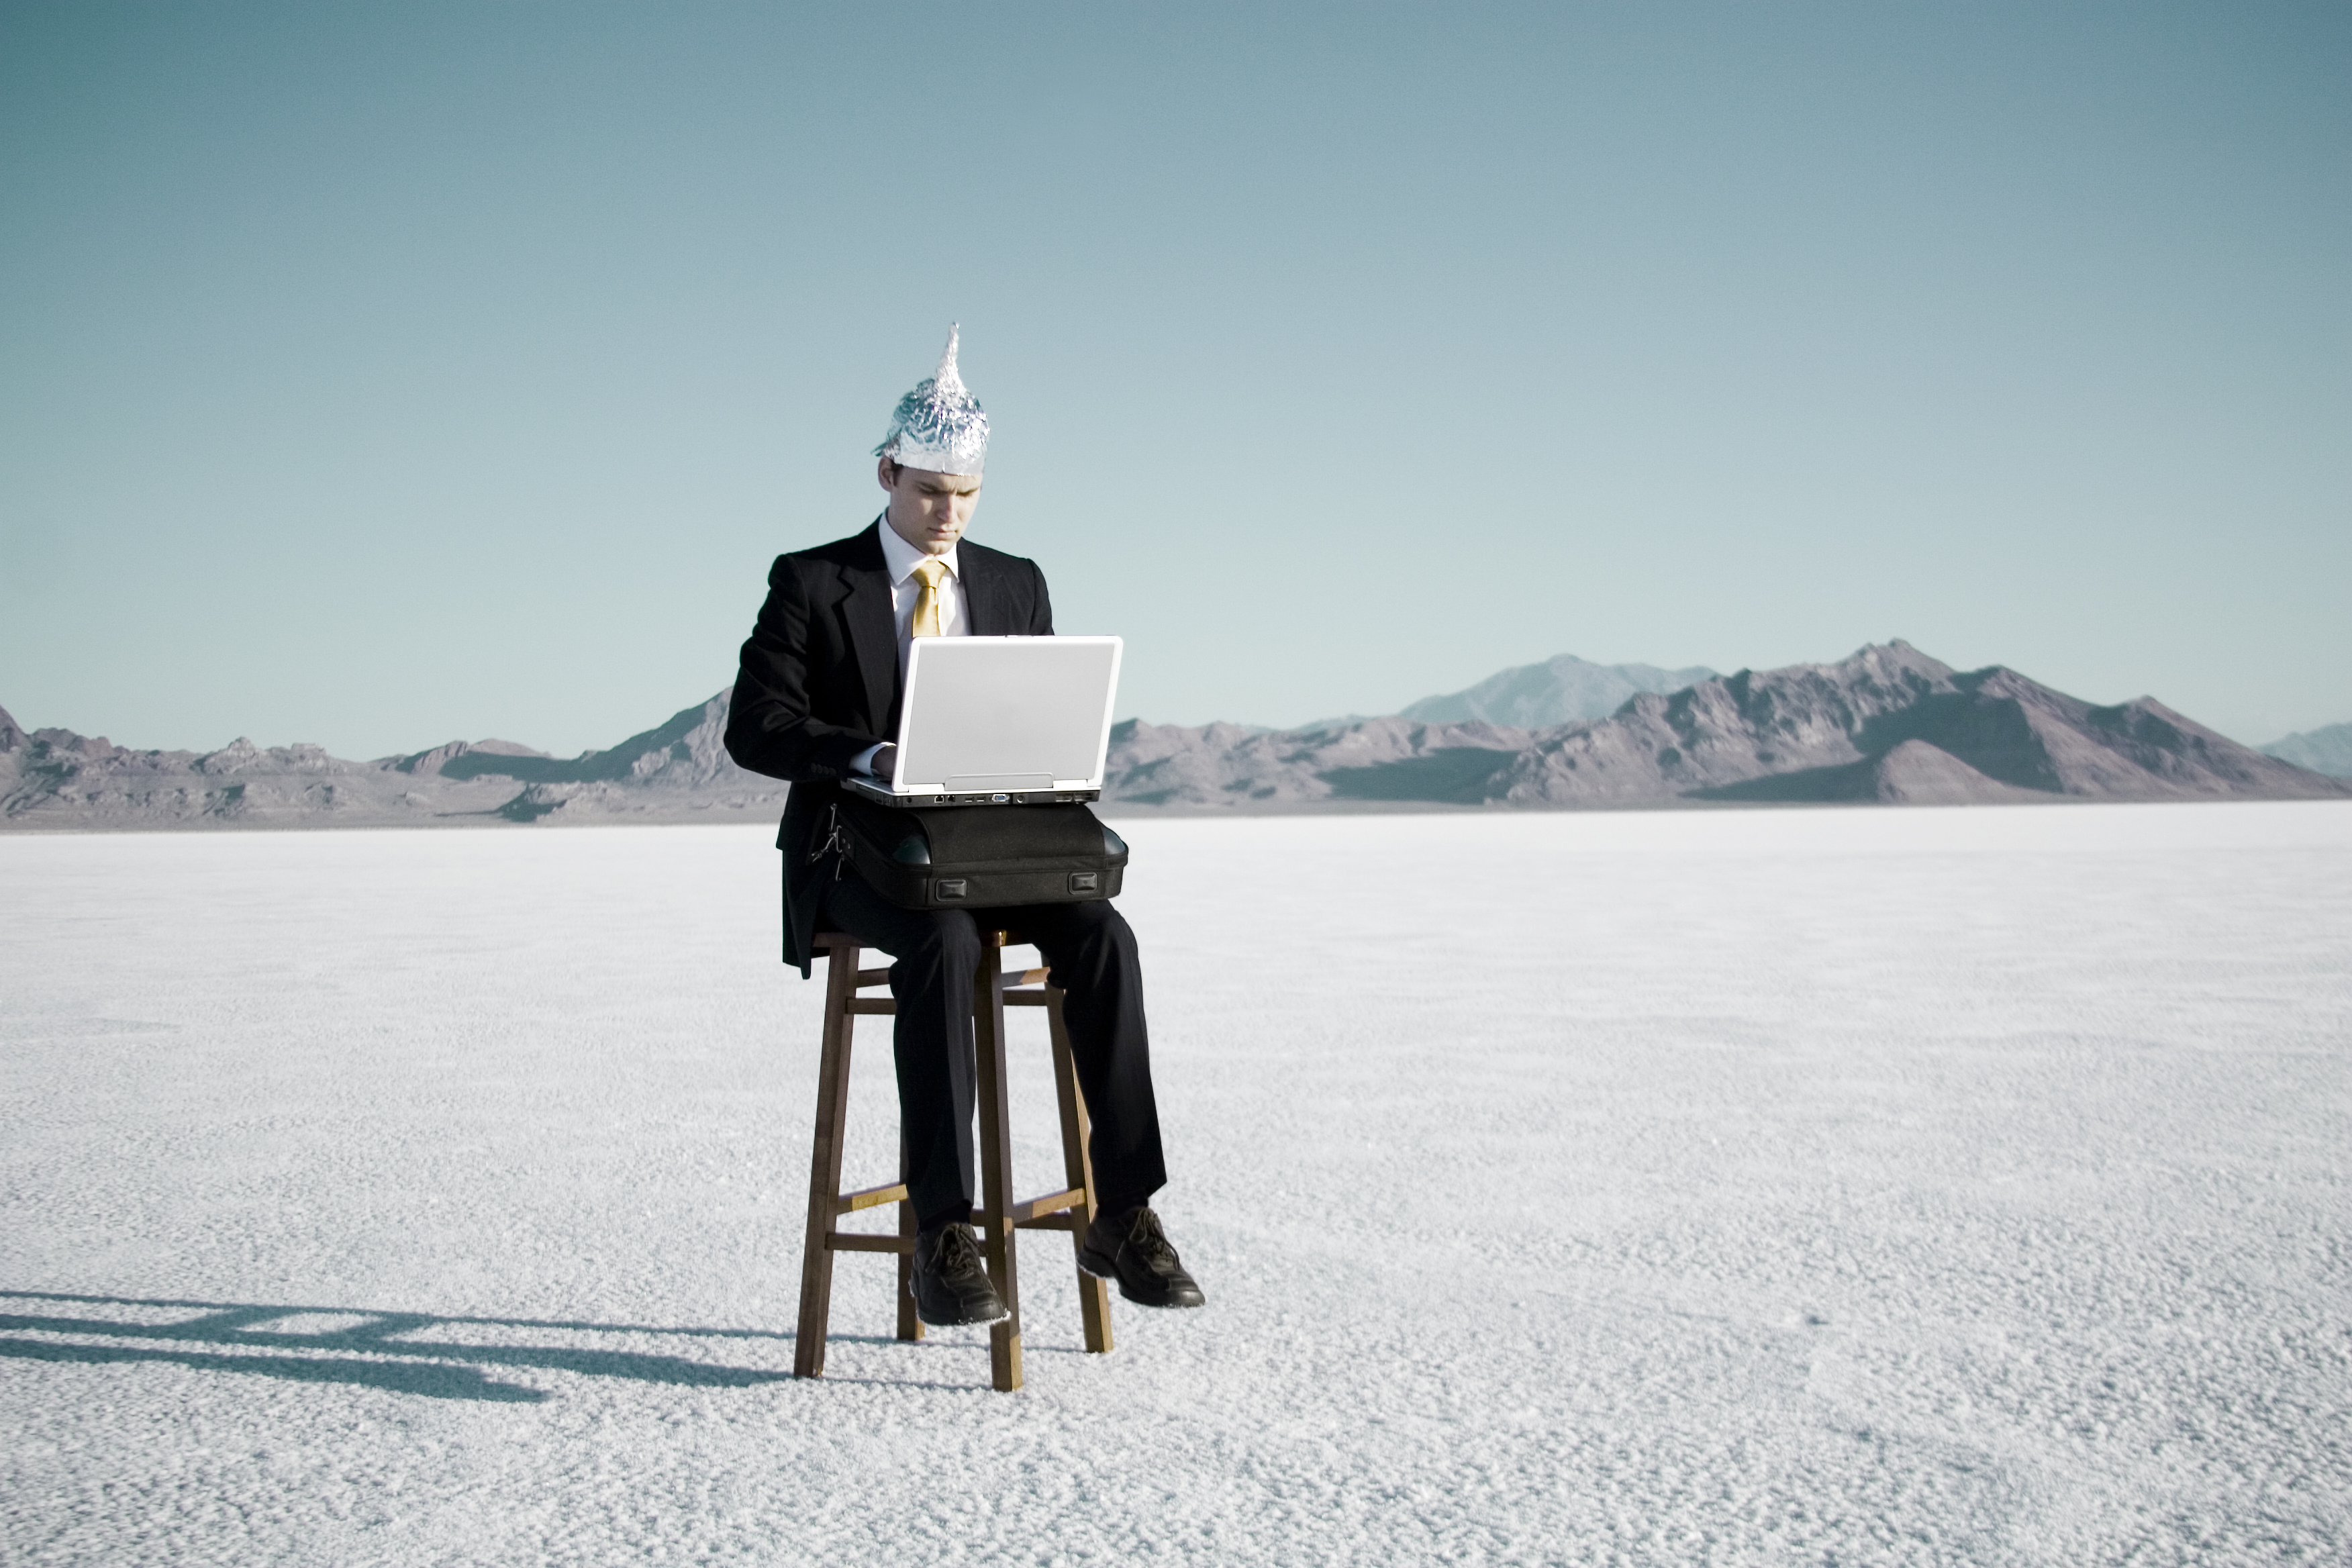 Man in a suit wears a tinfoil hat while sitting on a stool in the desert and working on his laptop